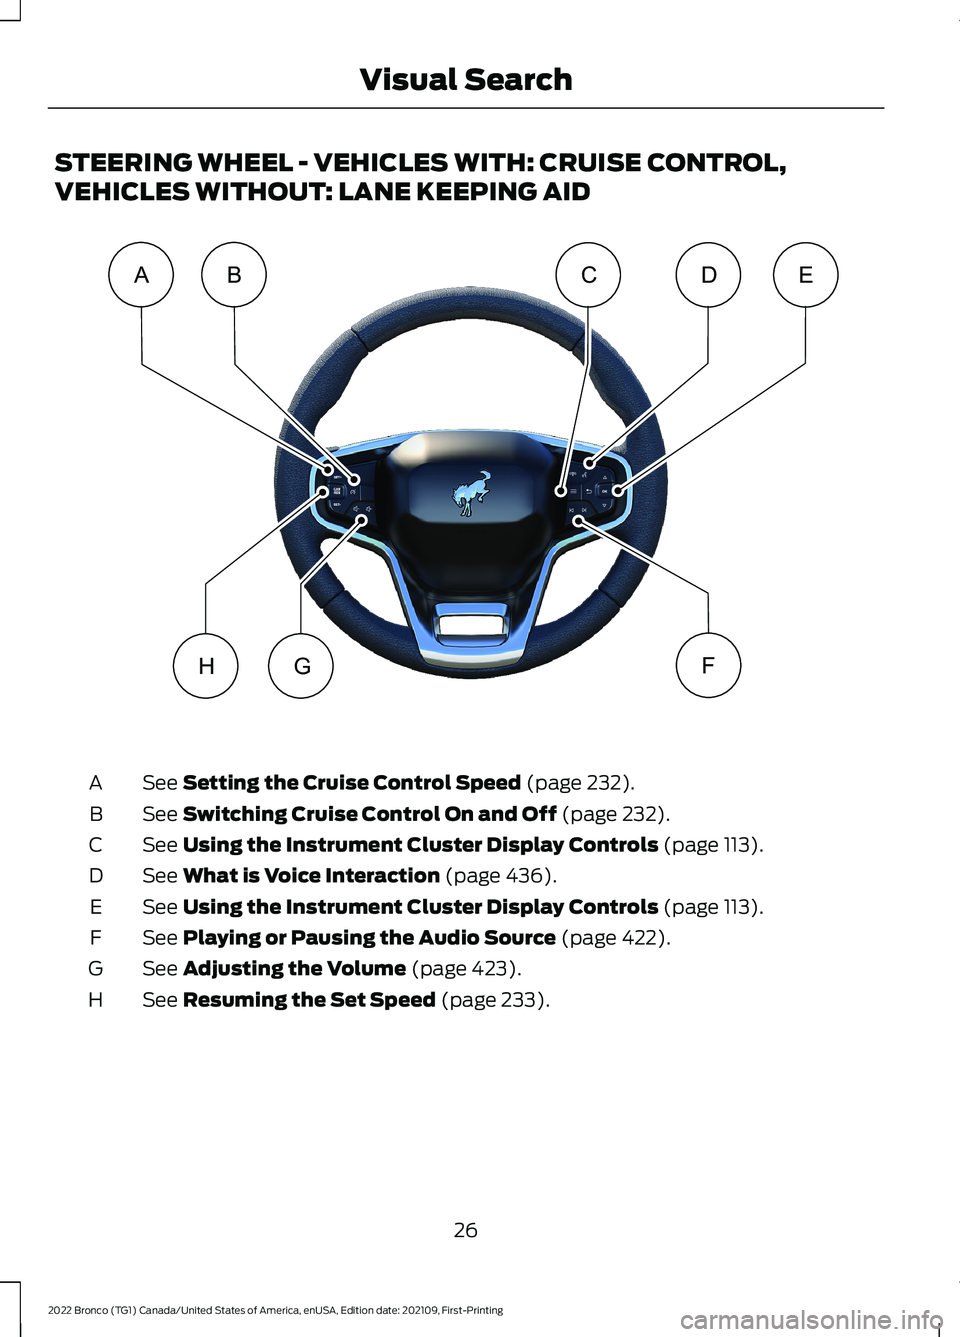 FORD BRONCO 2022  Owners Manual STEERING WHEEL - VEHICLES WITH: CRUISE CONTROL,
VEHICLES WITHOUT: LANE KEEPING AID
See Setting the Cruise Control Speed (page 232).A
See Switching Cruise Control On and Off (page 232).B
See Using the 